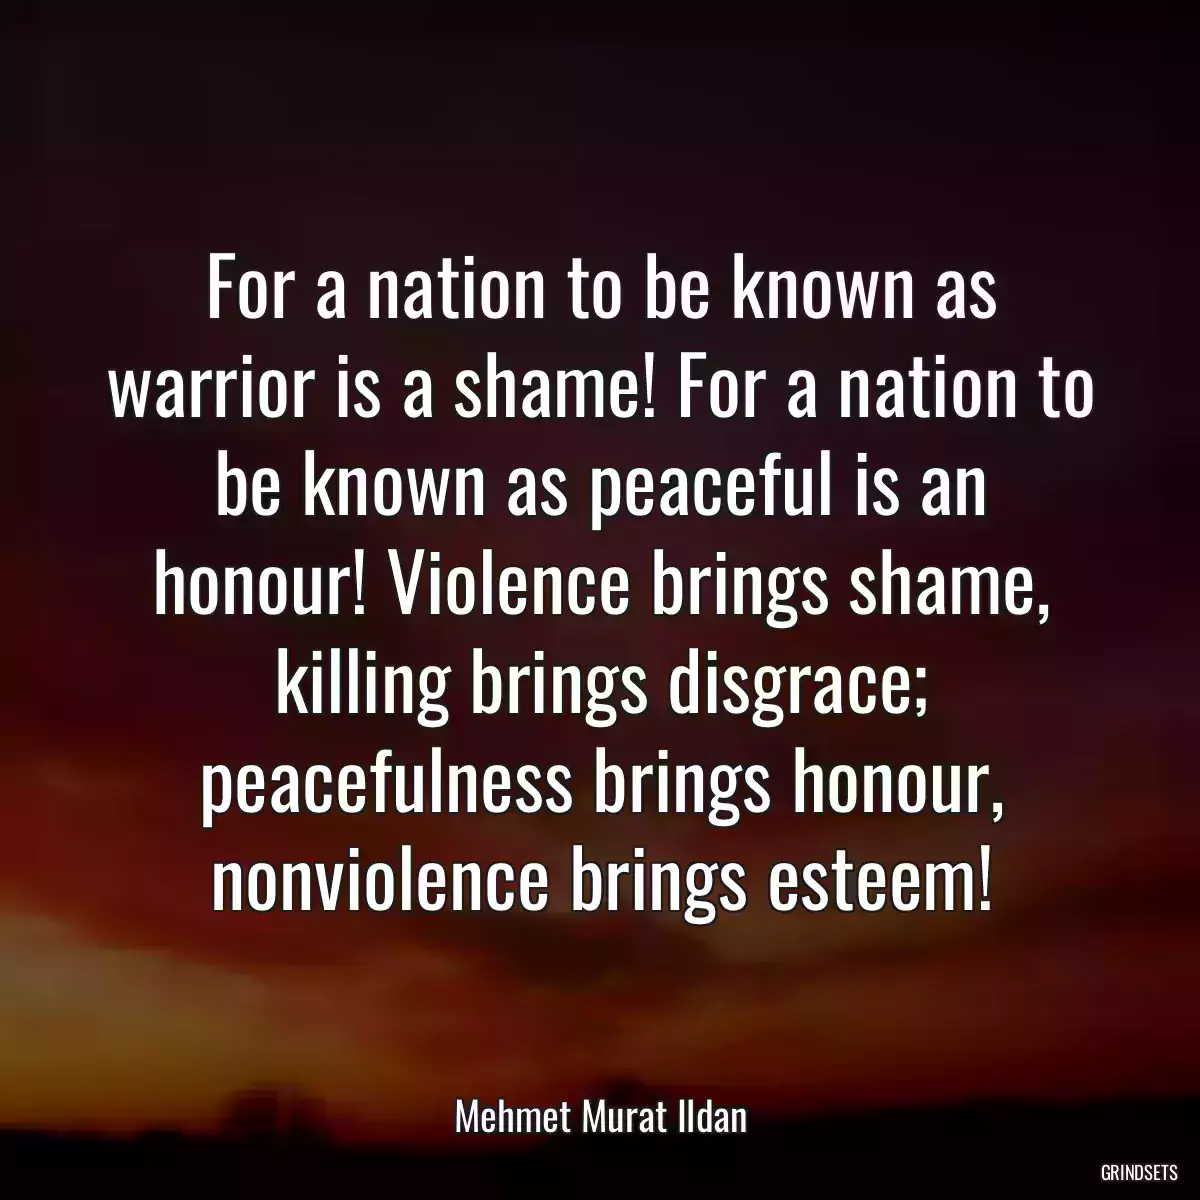 For a nation to be known as warrior is a shame! For a nation to be known as peaceful is an honour! Violence brings shame, killing brings disgrace; peacefulness brings honour, nonviolence brings esteem!